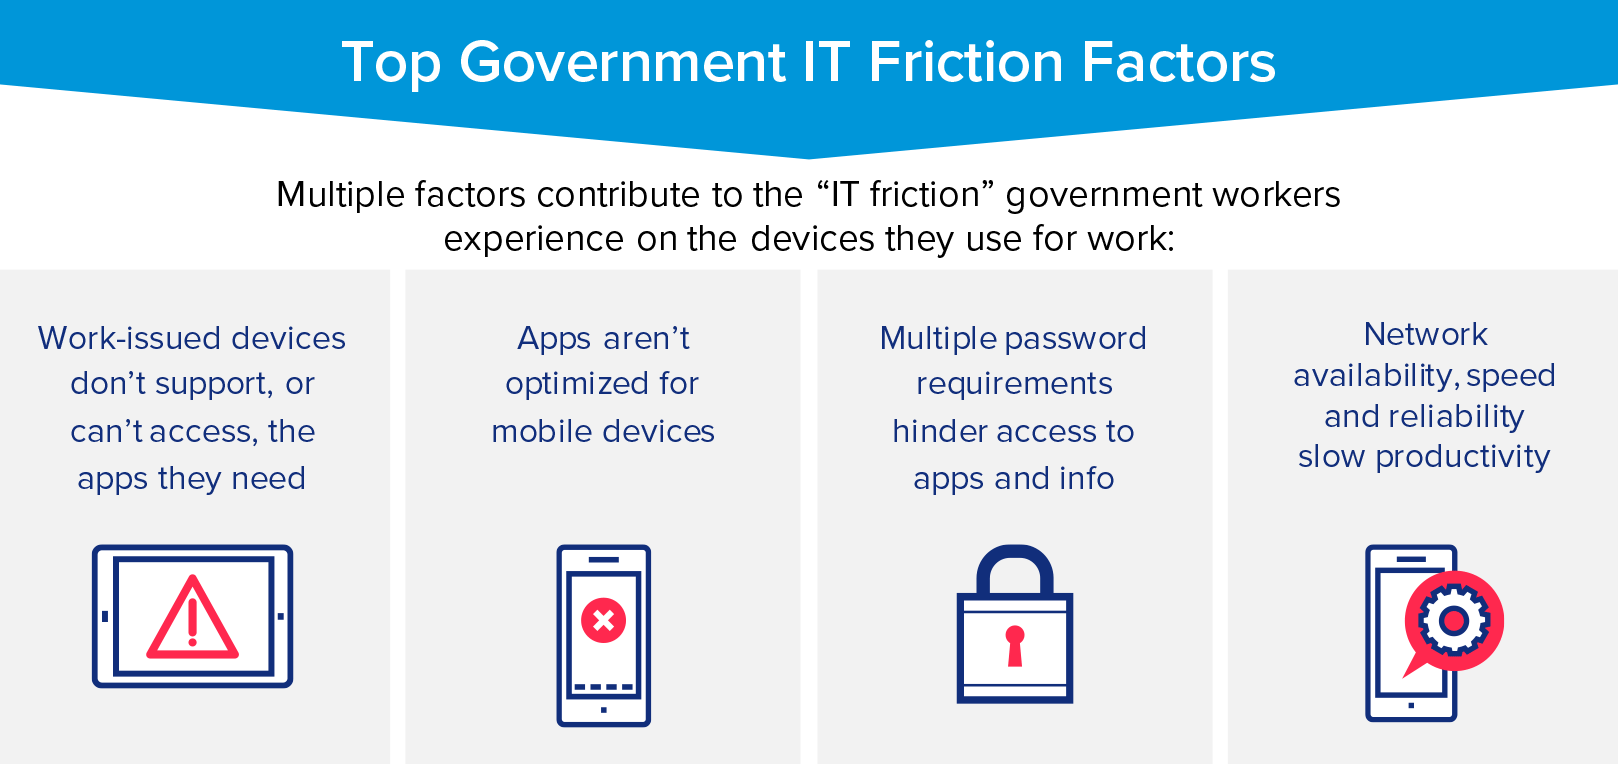 Top Government IT Friction Factors